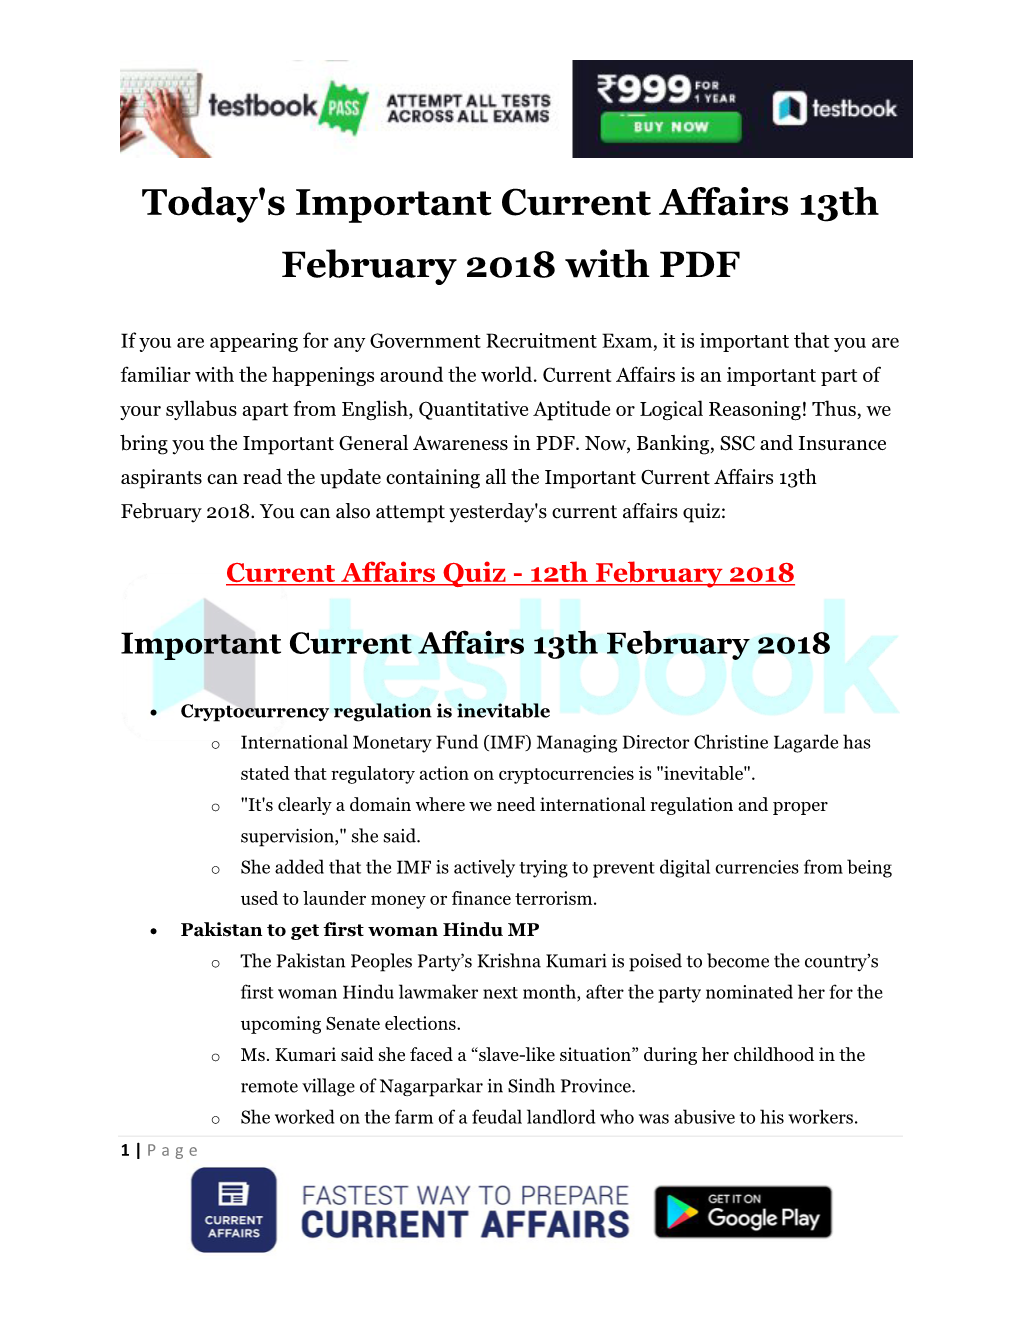 Today's Important Current Affairs 13Th February 2018 with PDF